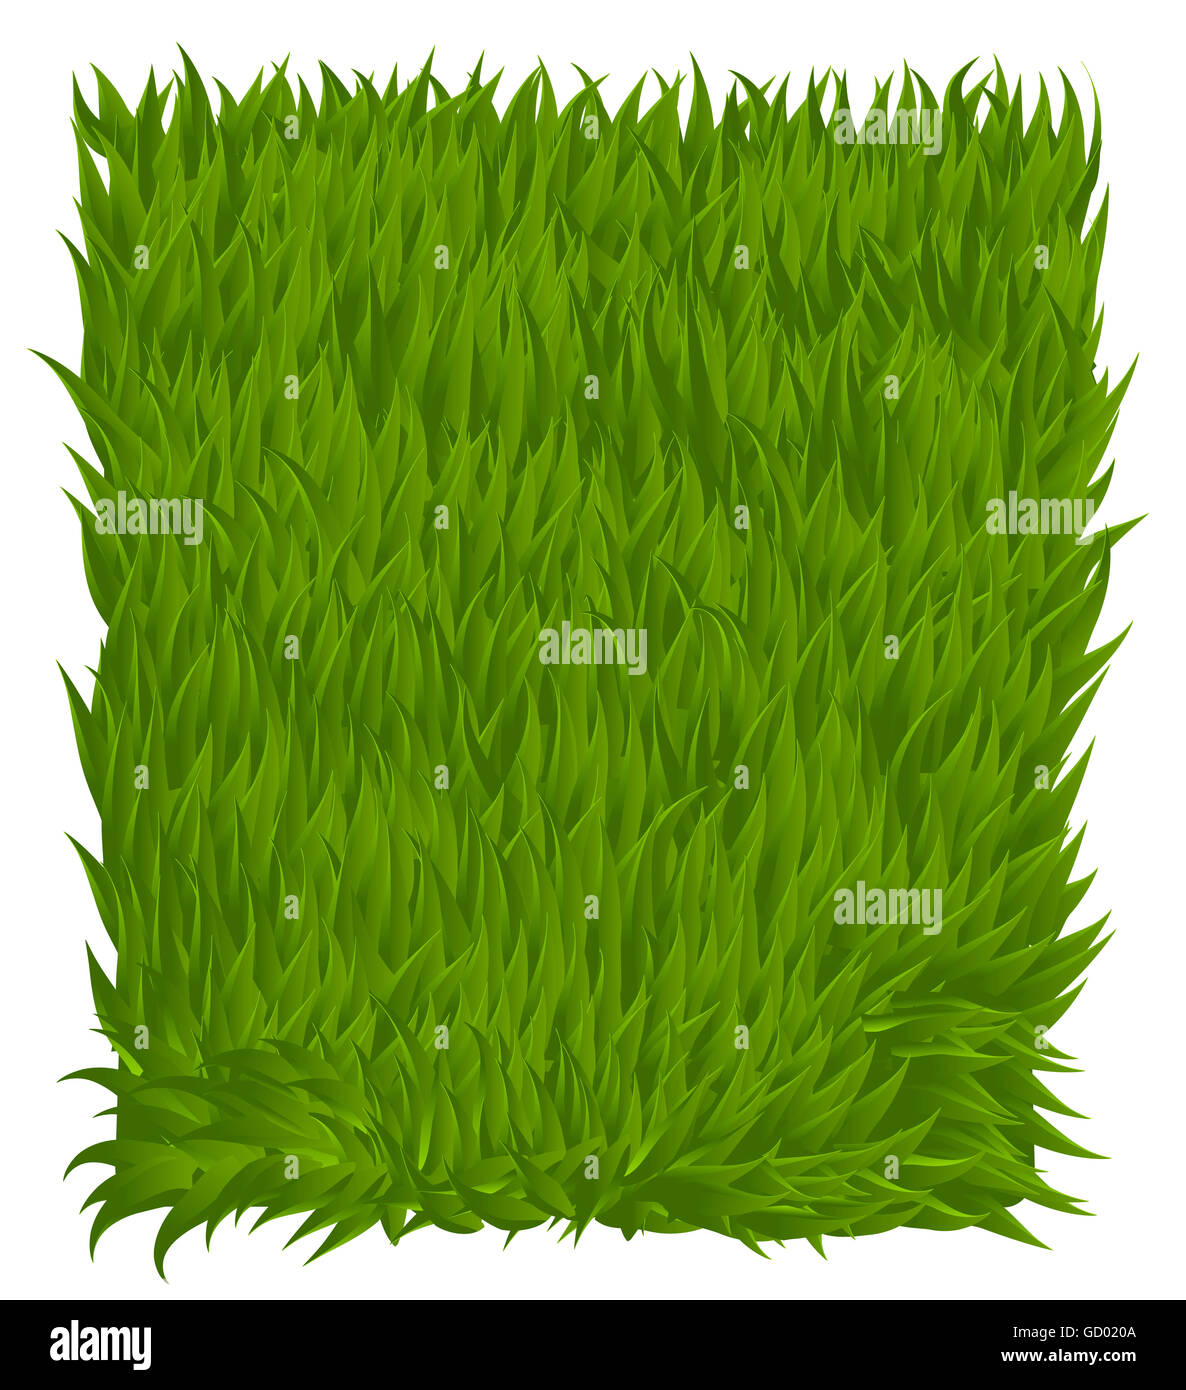 Green grass texture rectangle isolated on white Stock Photo